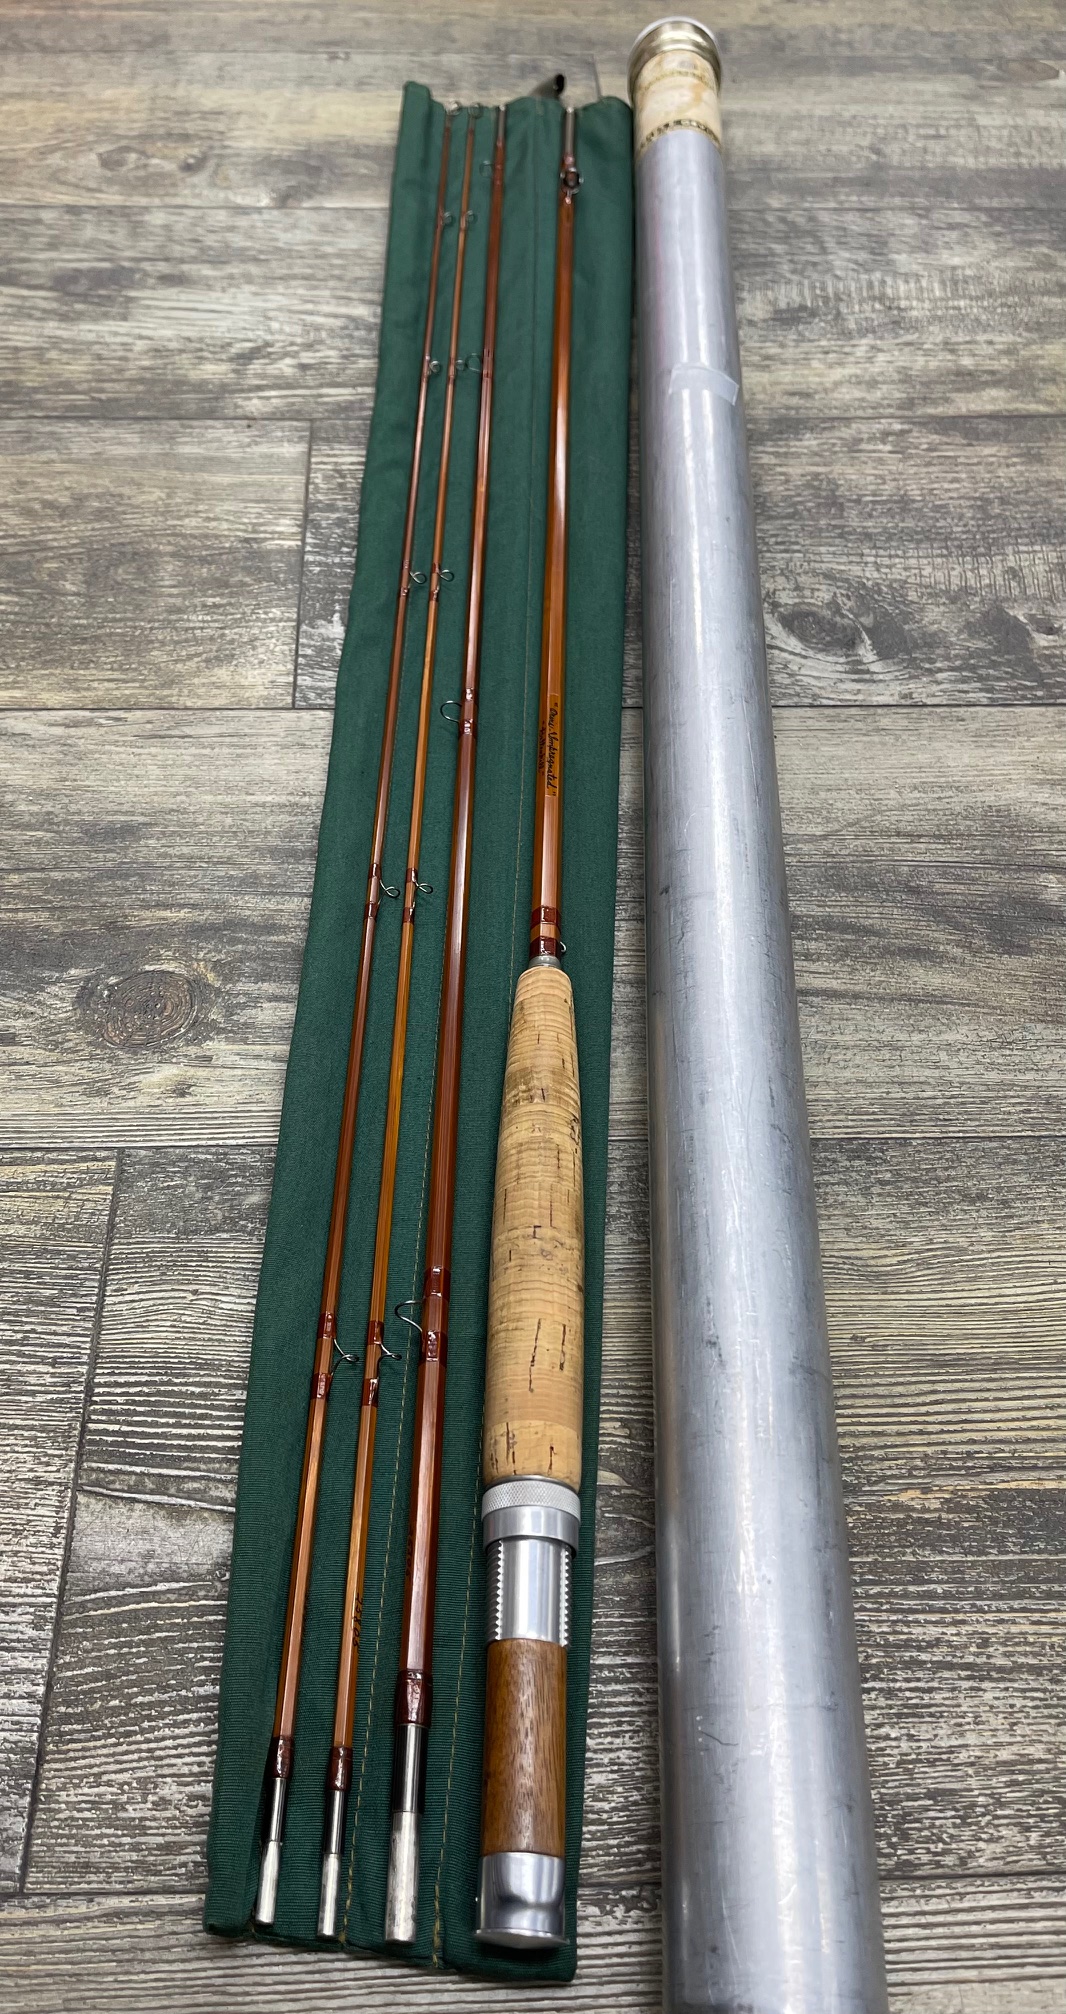 Orvis Impregnated Cane Battenkill 8' 3pc #6 Fly Rod - ser. 25805 - Great Condition